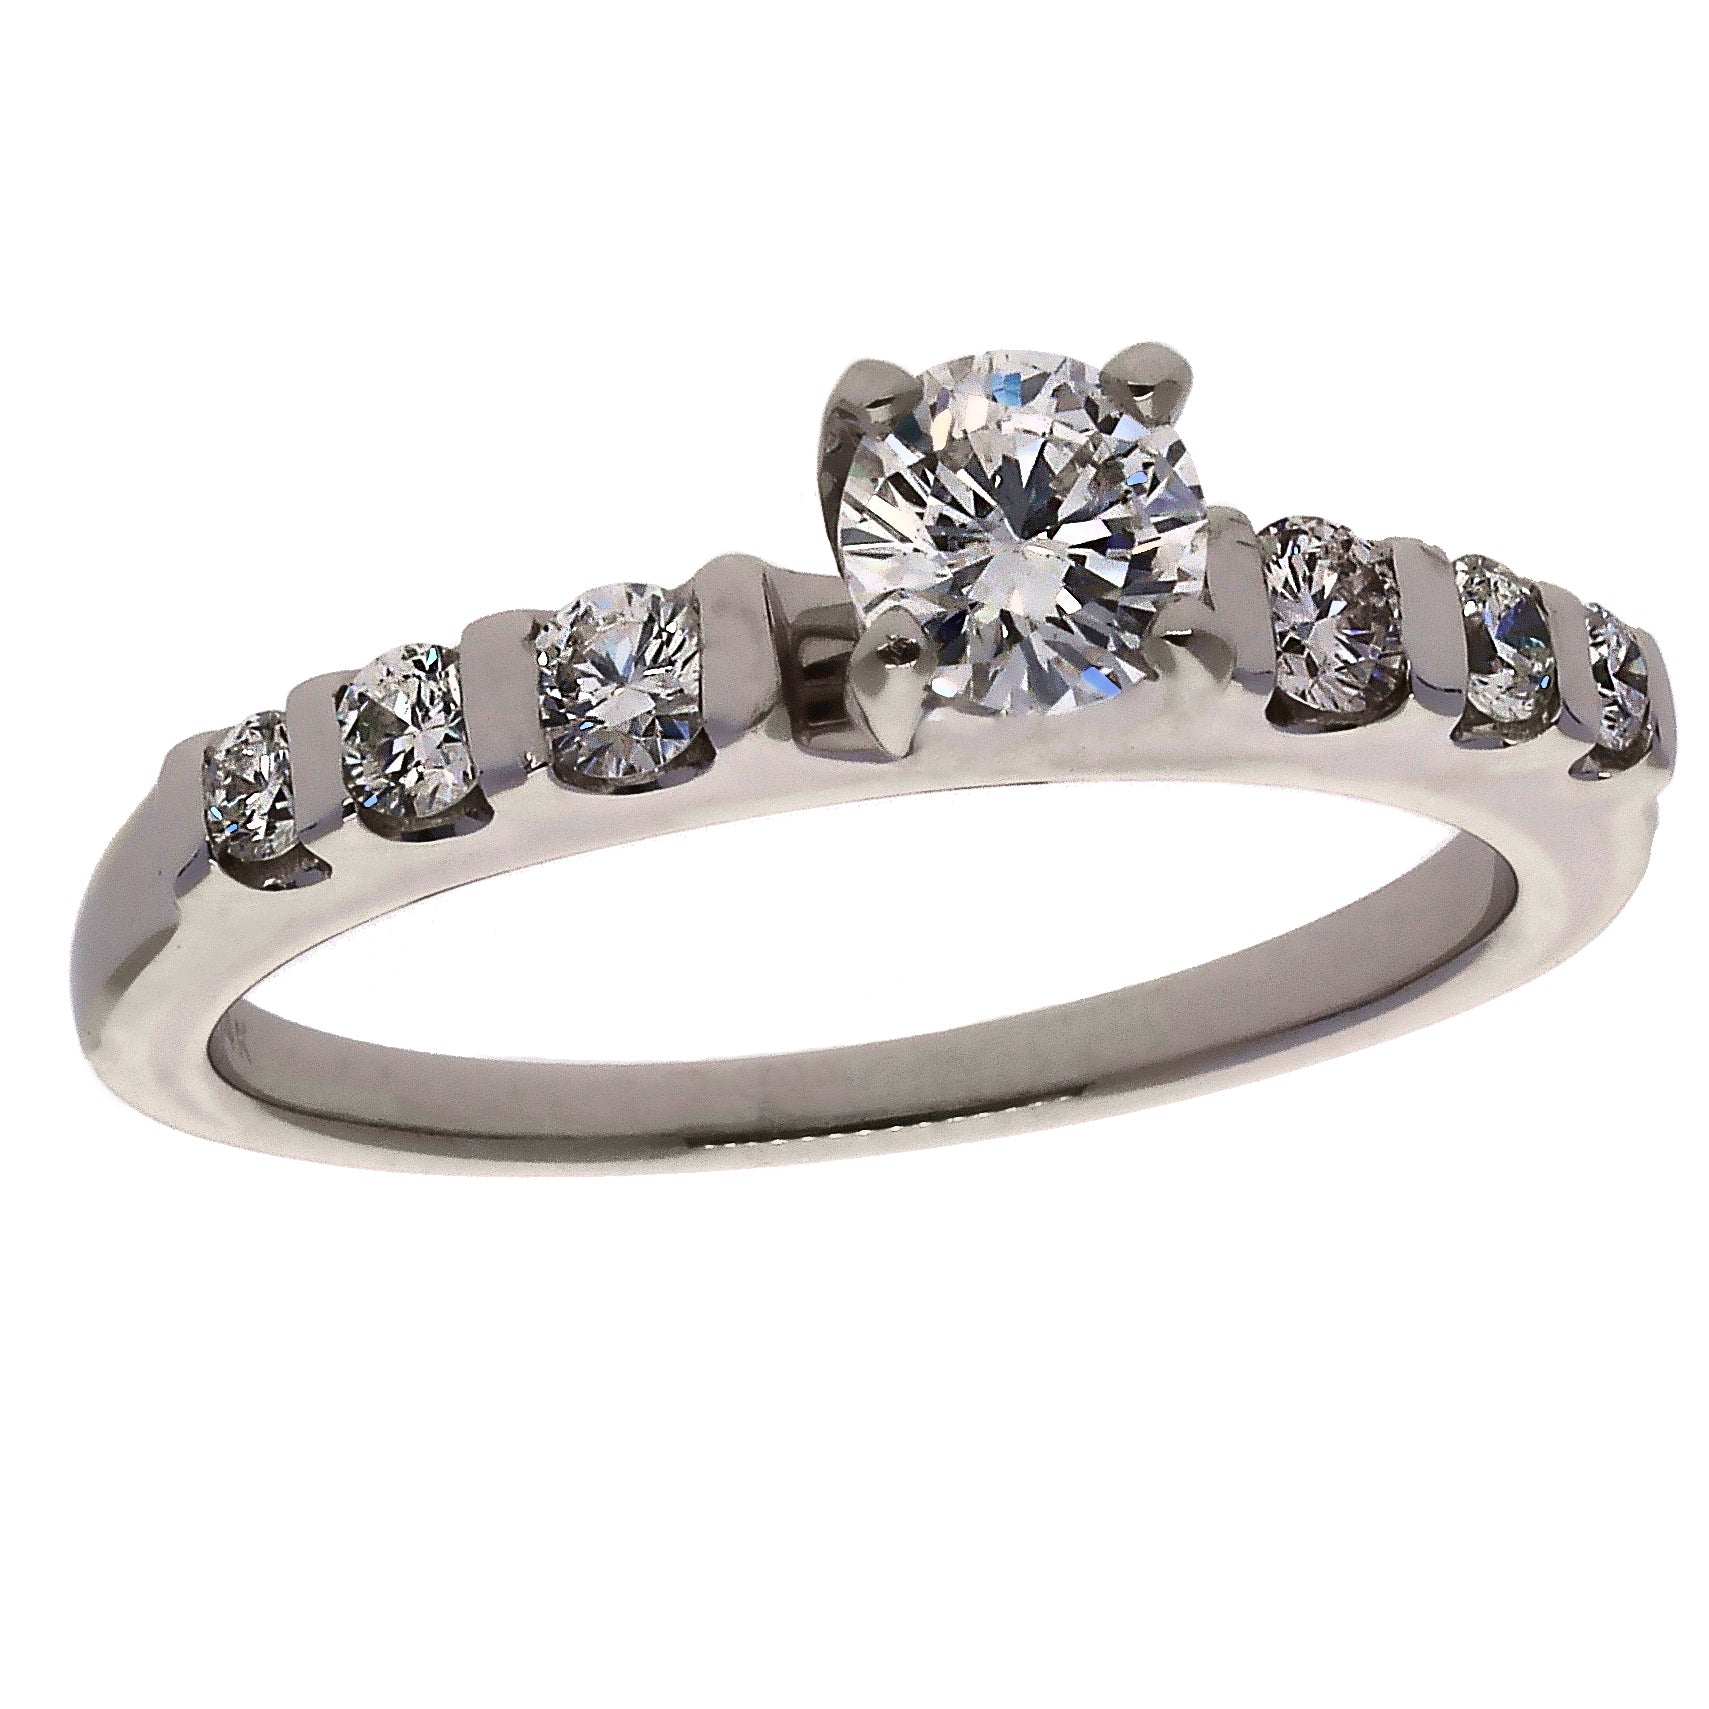 14K White Gold with Round Center Diamond Engagement Ring